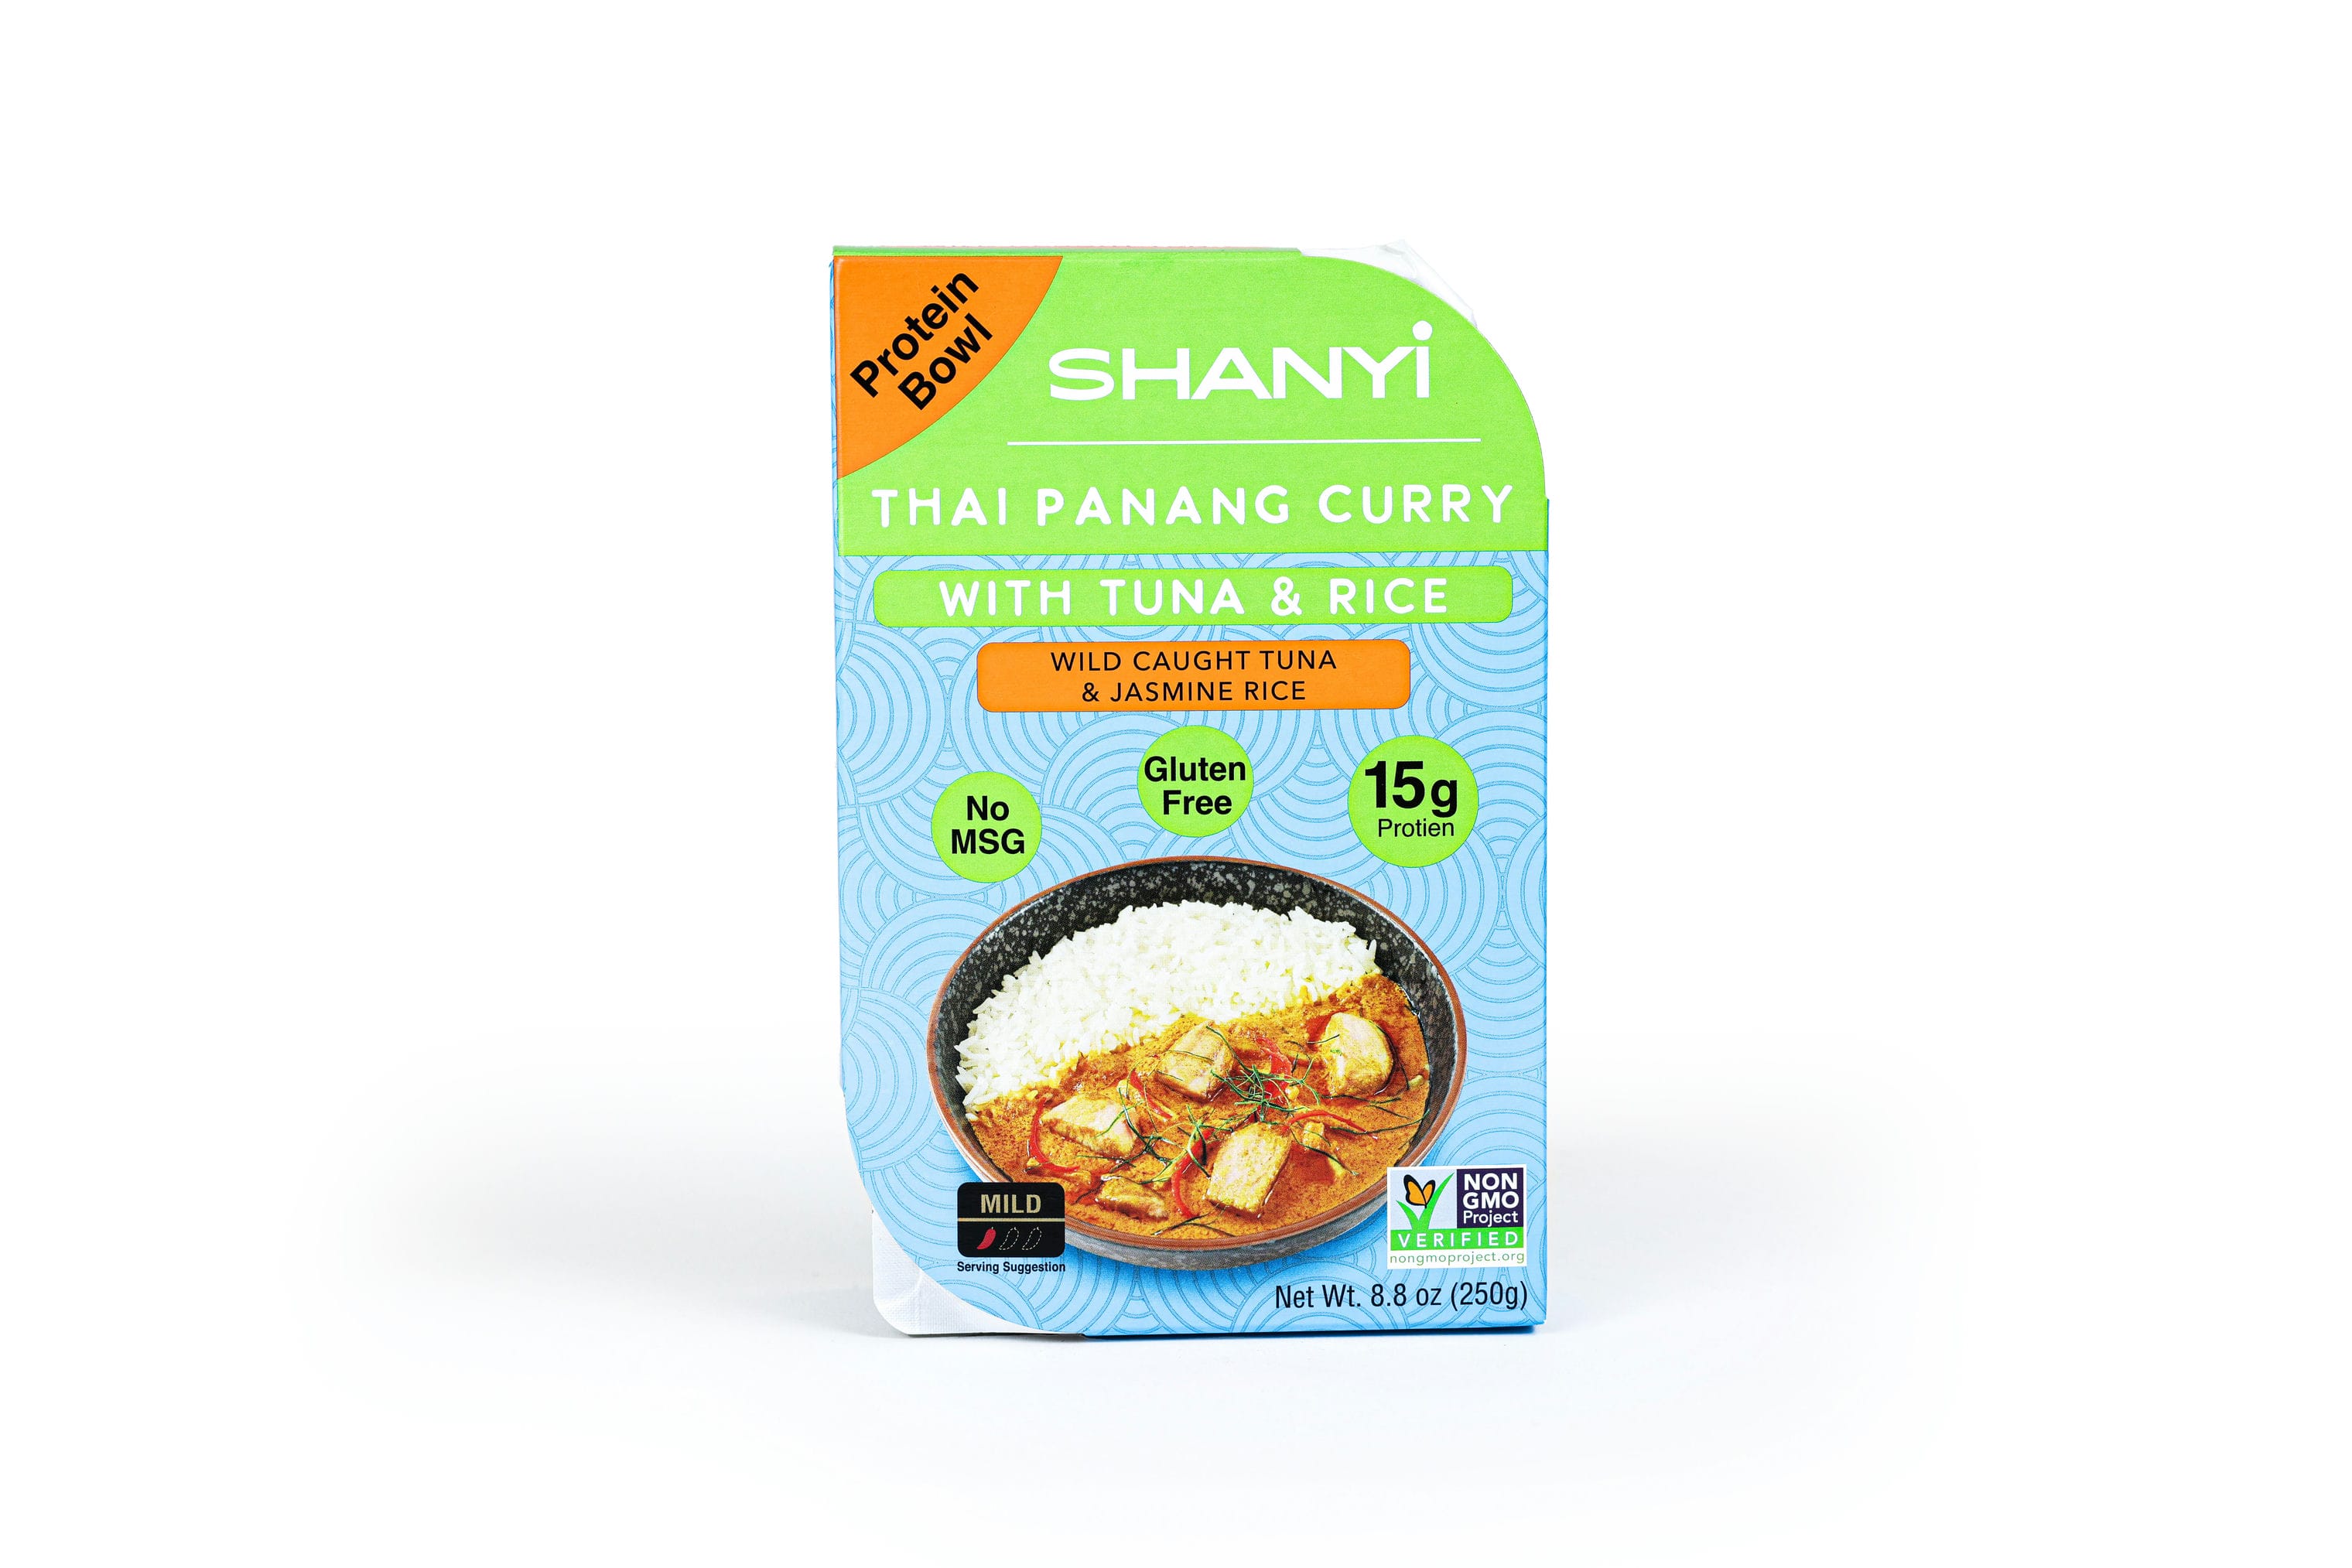 ShanYi Instant Microwave Meals Ready to Eat, 250g/8.8oz, Japanese Curry Tuna/Teriyaki Tuna Steak/Thai Panang/Green Curry with Salmon/Tuna and Jasmine Rice, Prepared Foods, 6-In-1 Mixed Flavors, 6 Pack